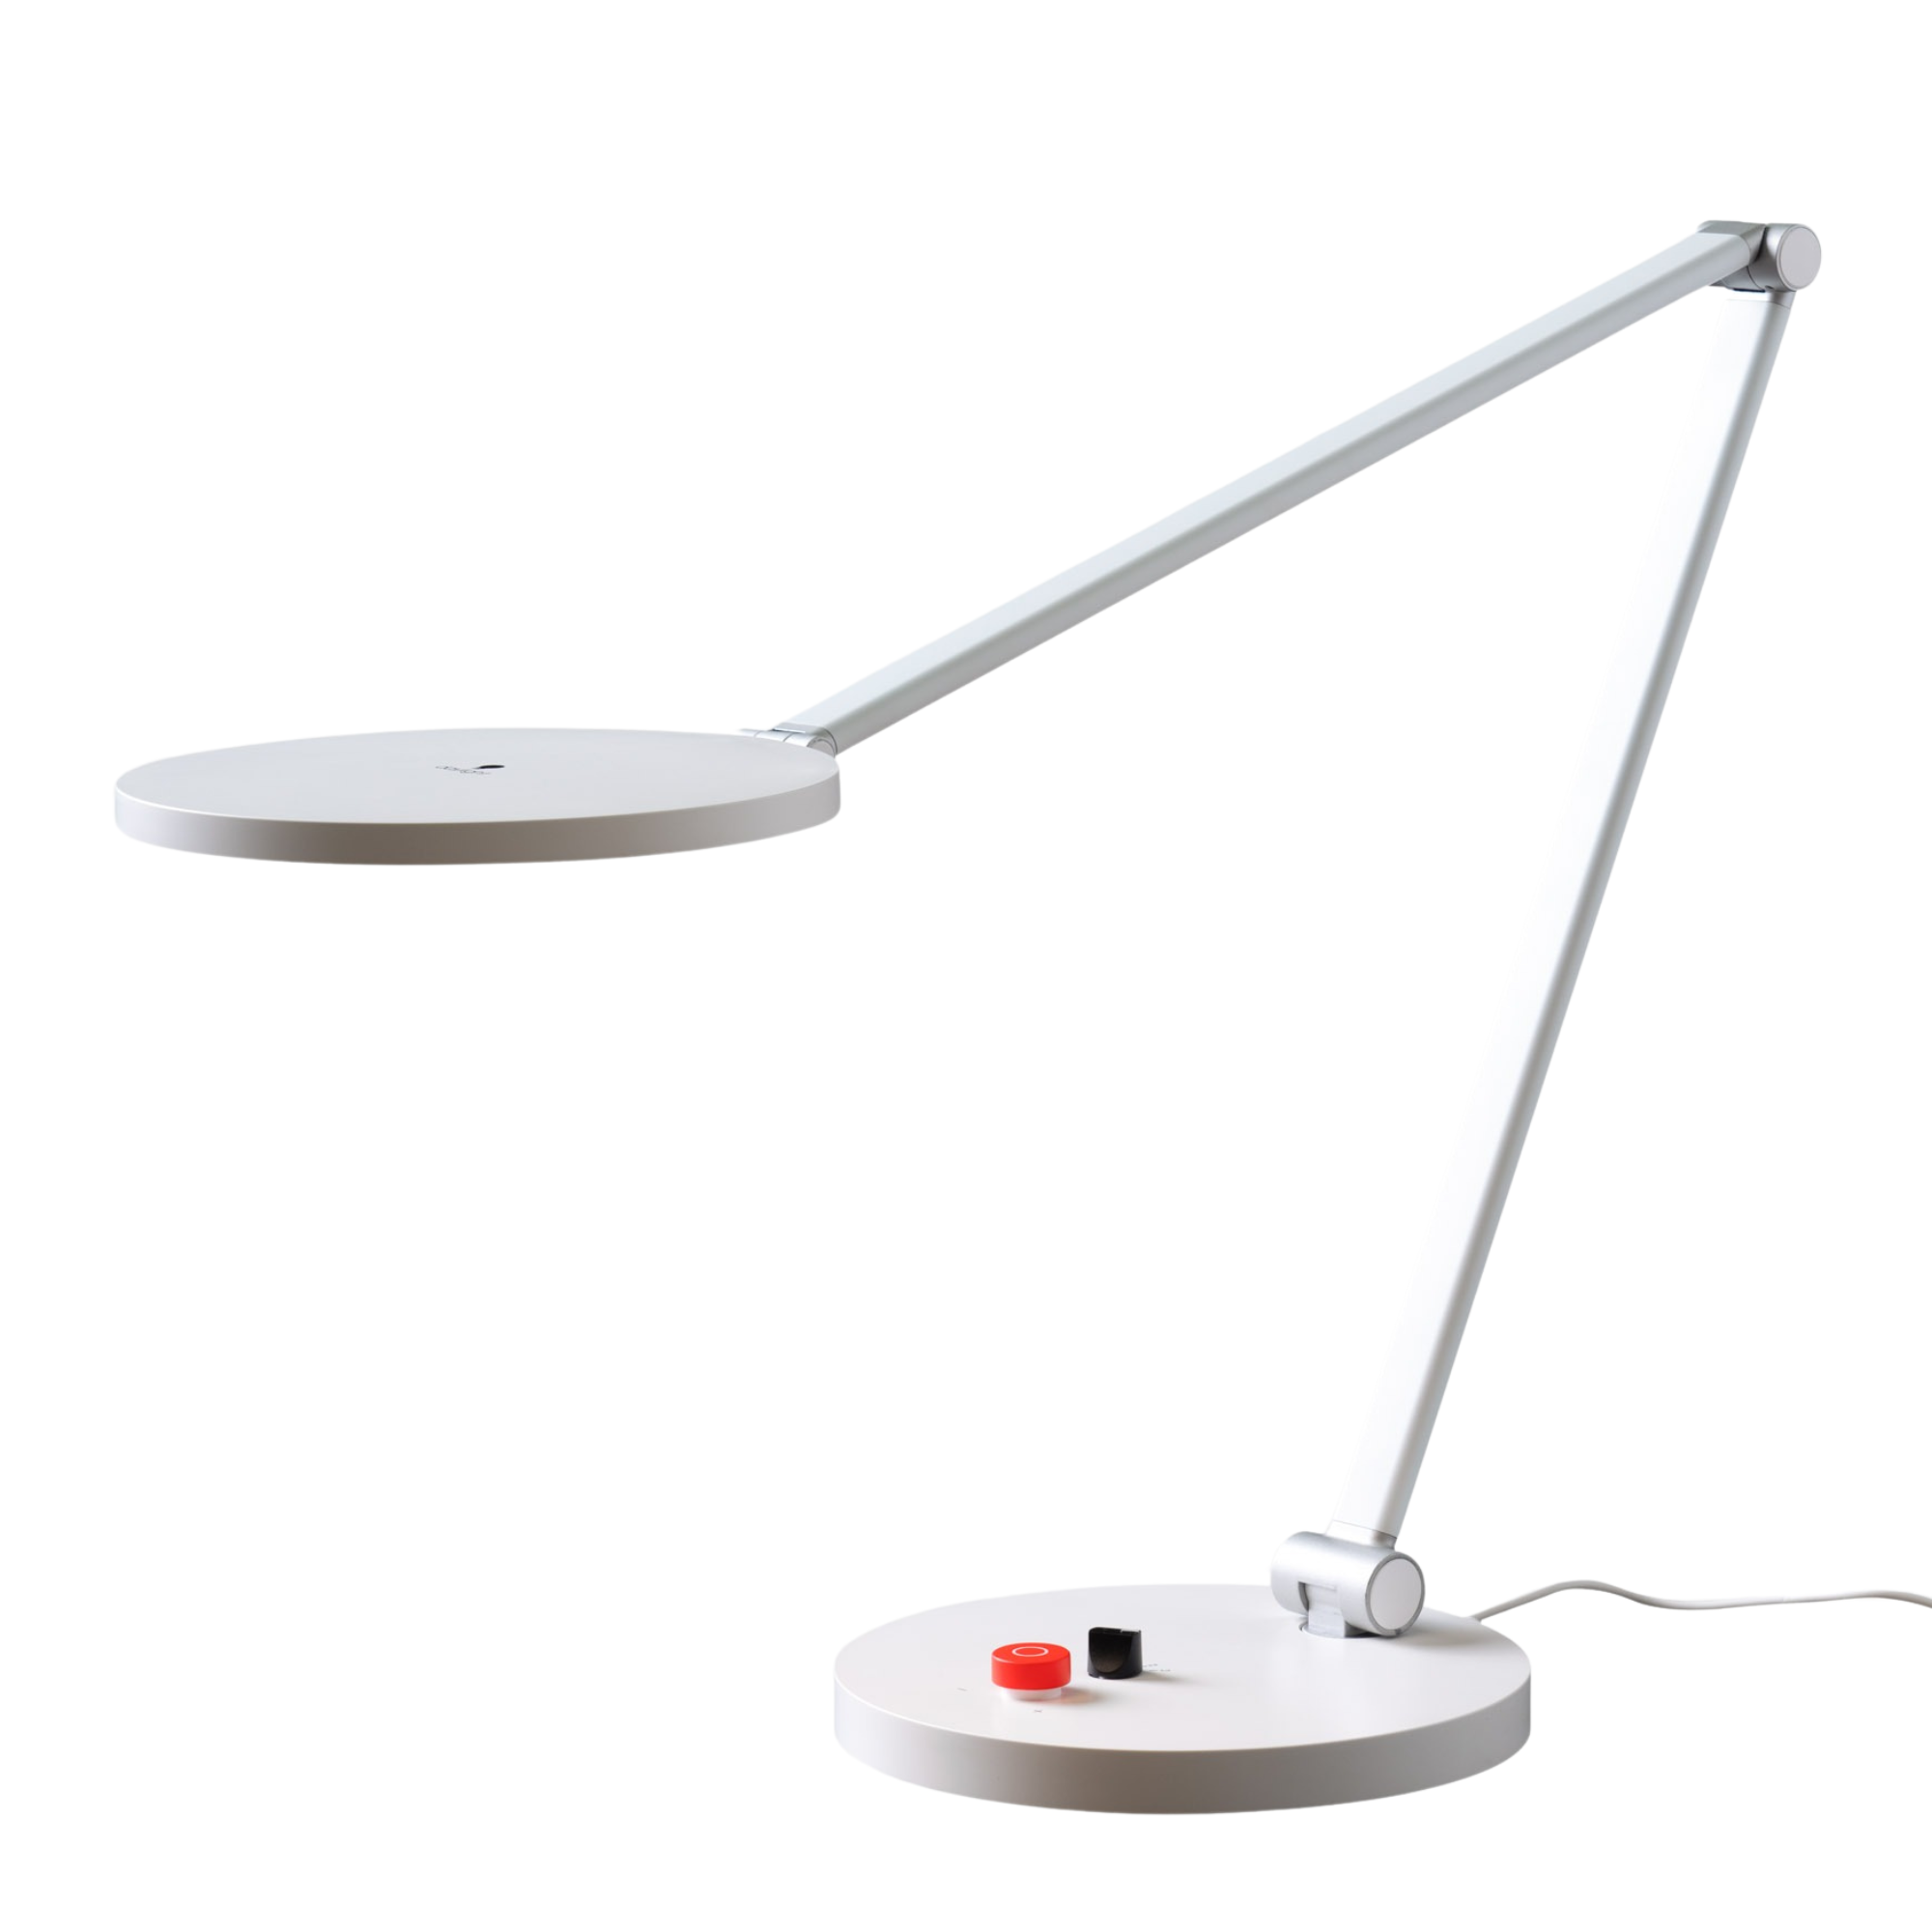 Tricolor Daylight table lighting with adjustable light temperature